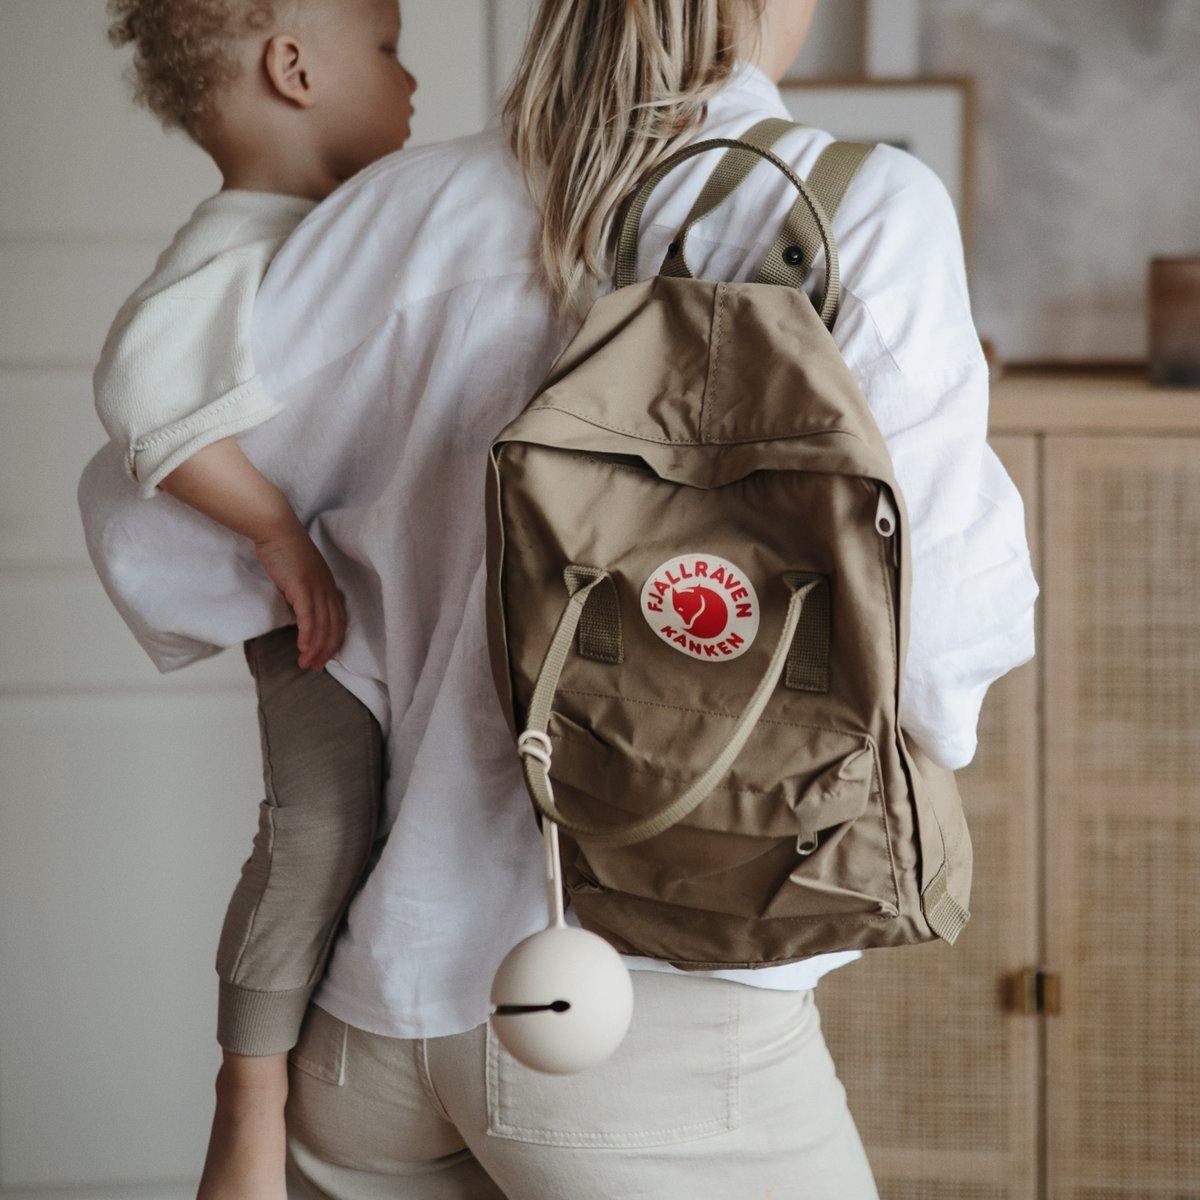 Mom using Mushie Silicone Pacifier Holder Case - Shifting Sands on Fjallraven backpack